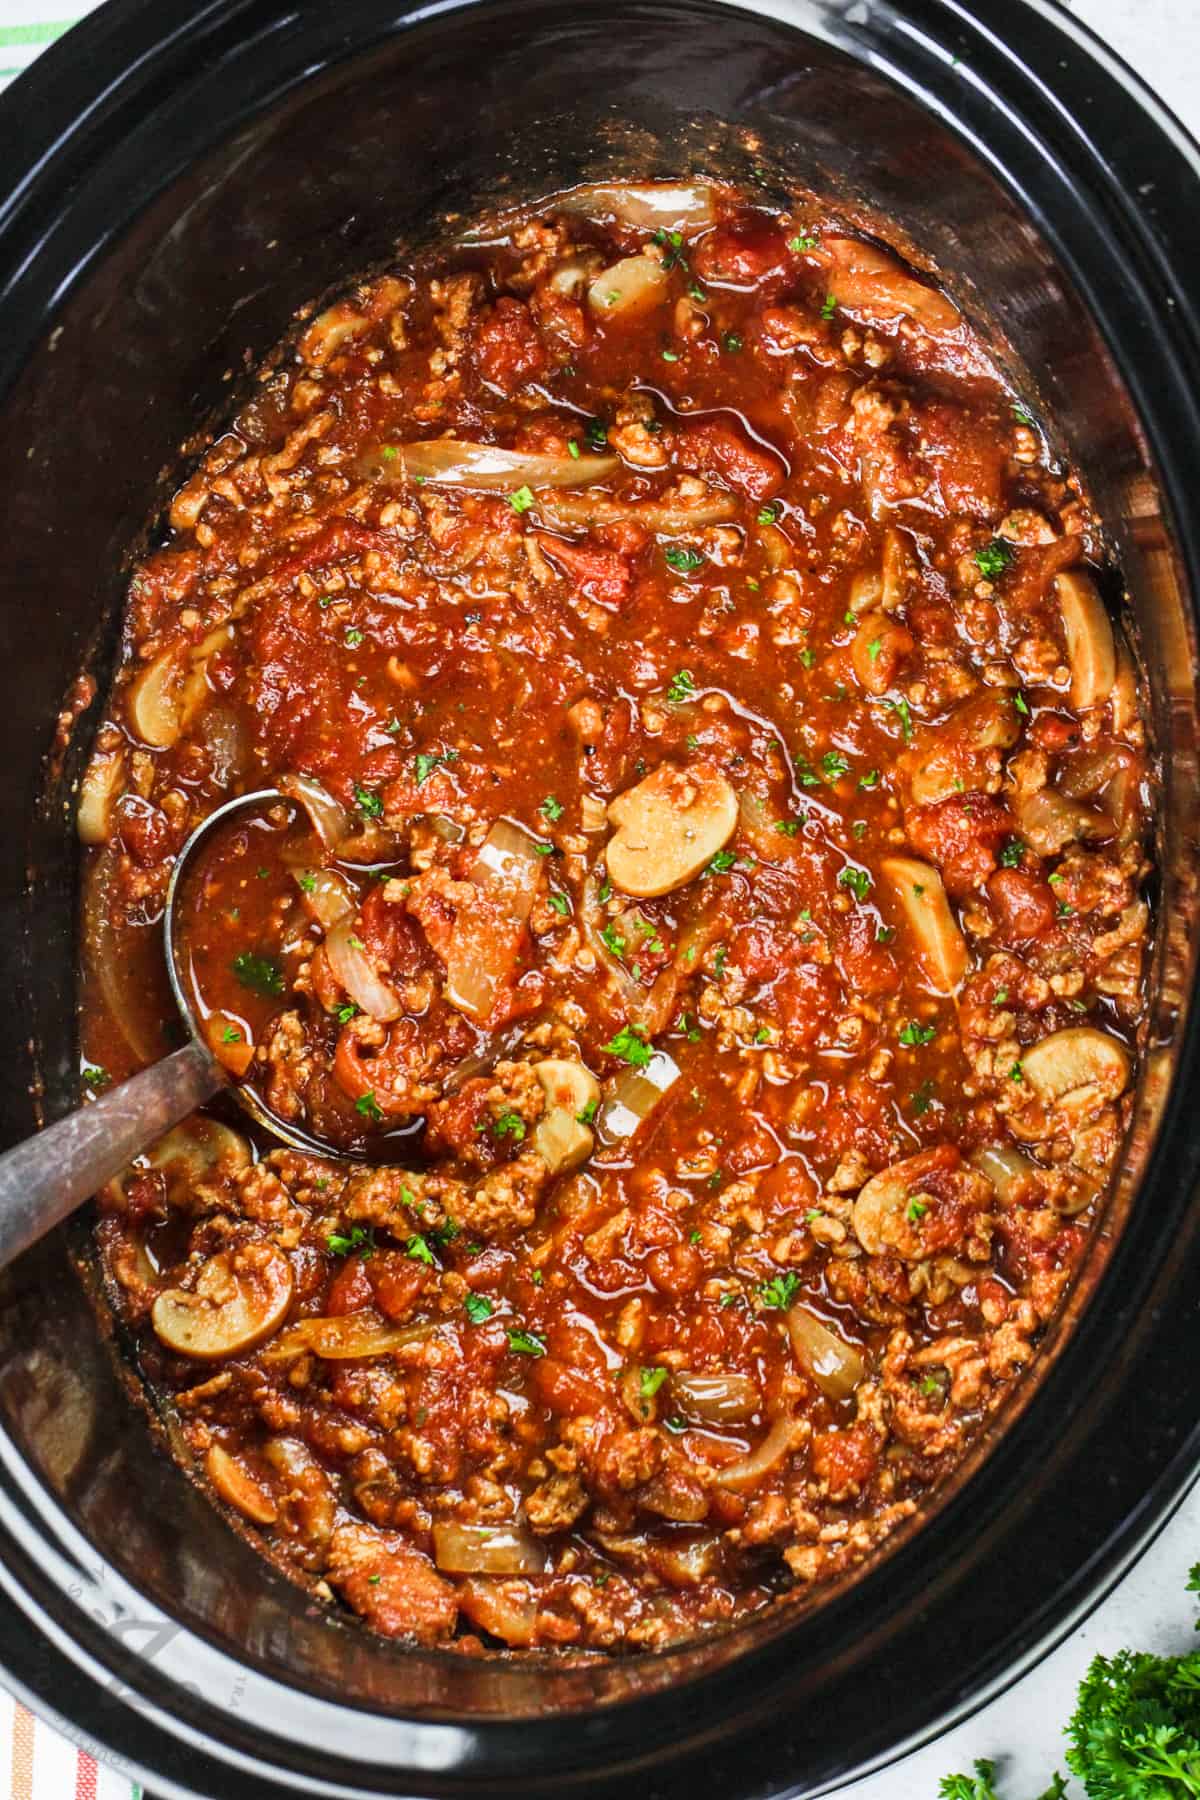 Slow Cooker Spaghetti Sauce cooked in the pot